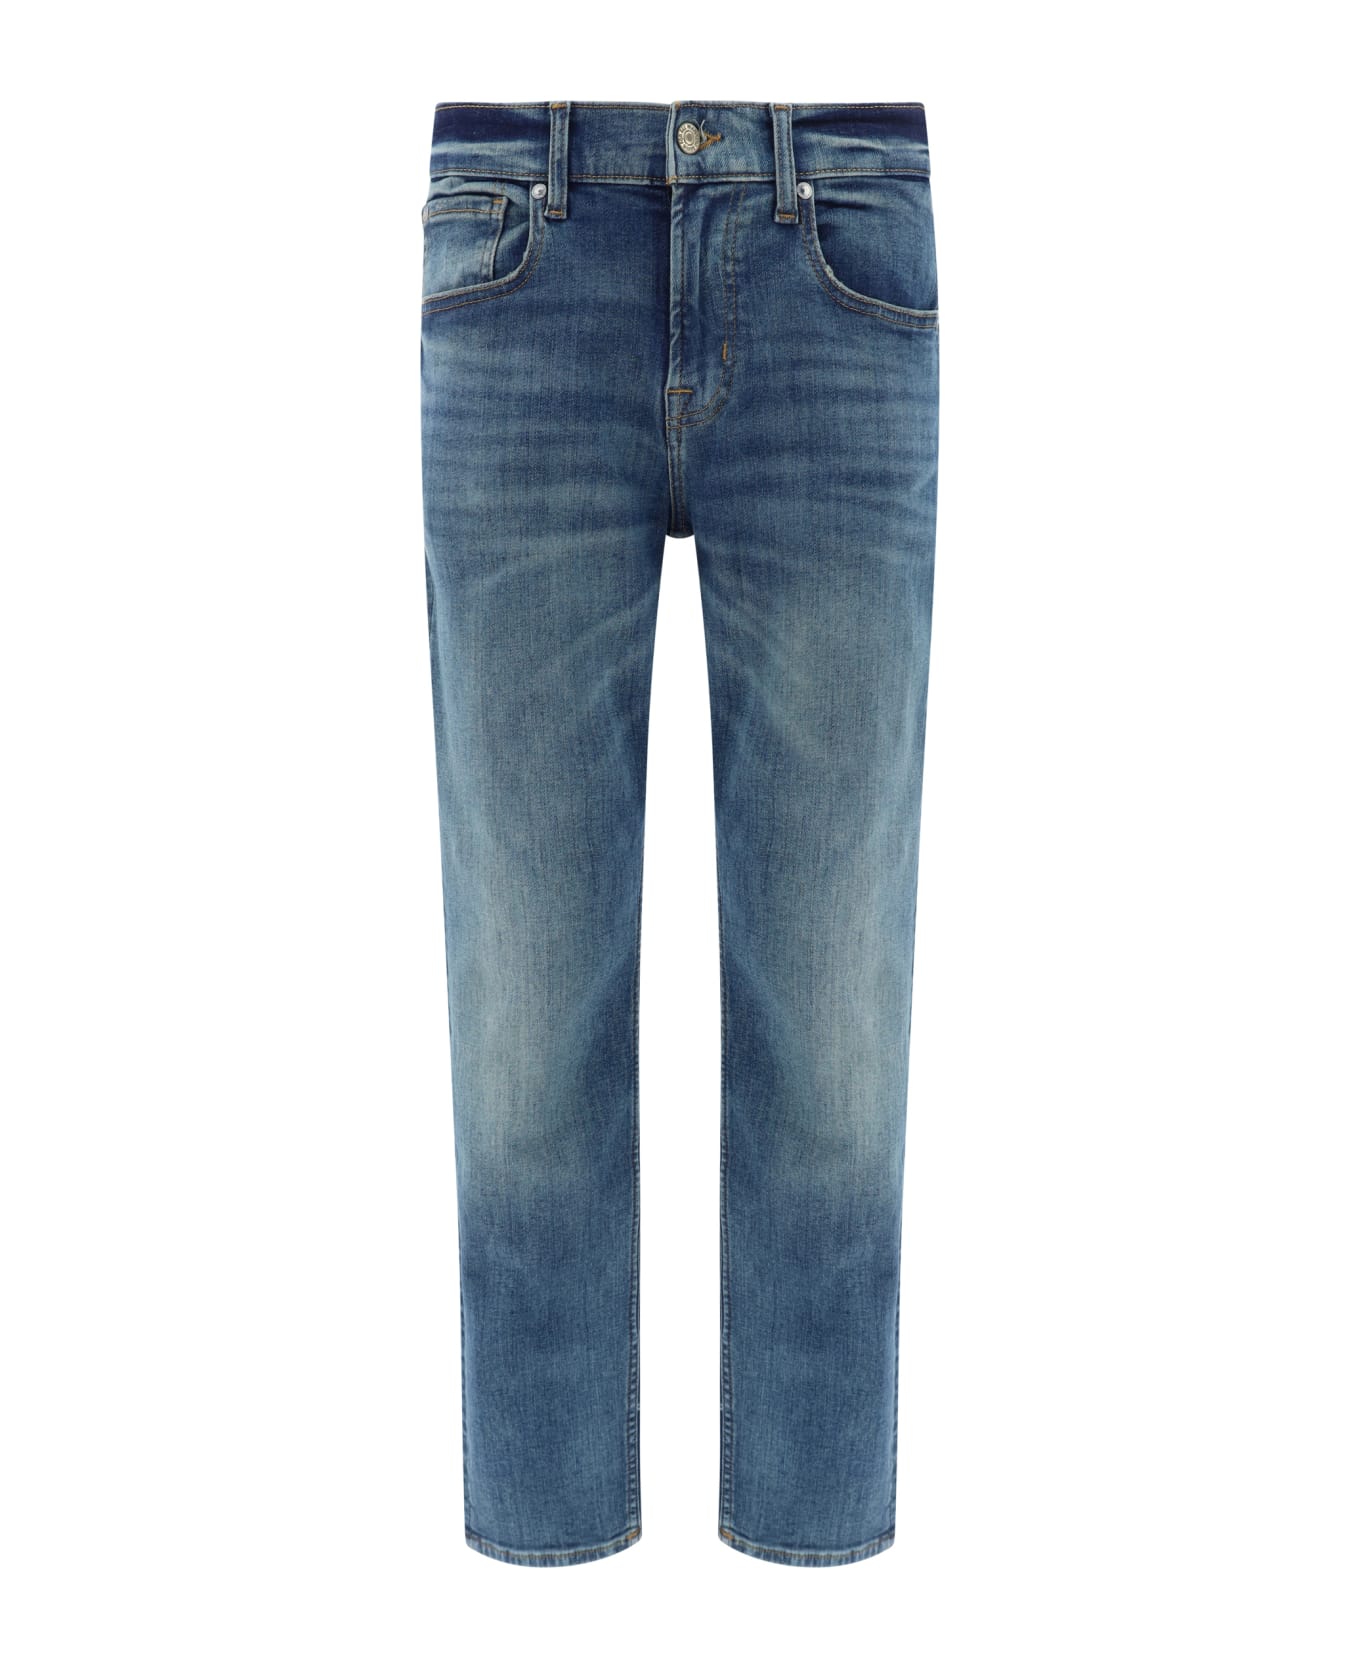 7 For All Mankind Jeans - Mid Blue